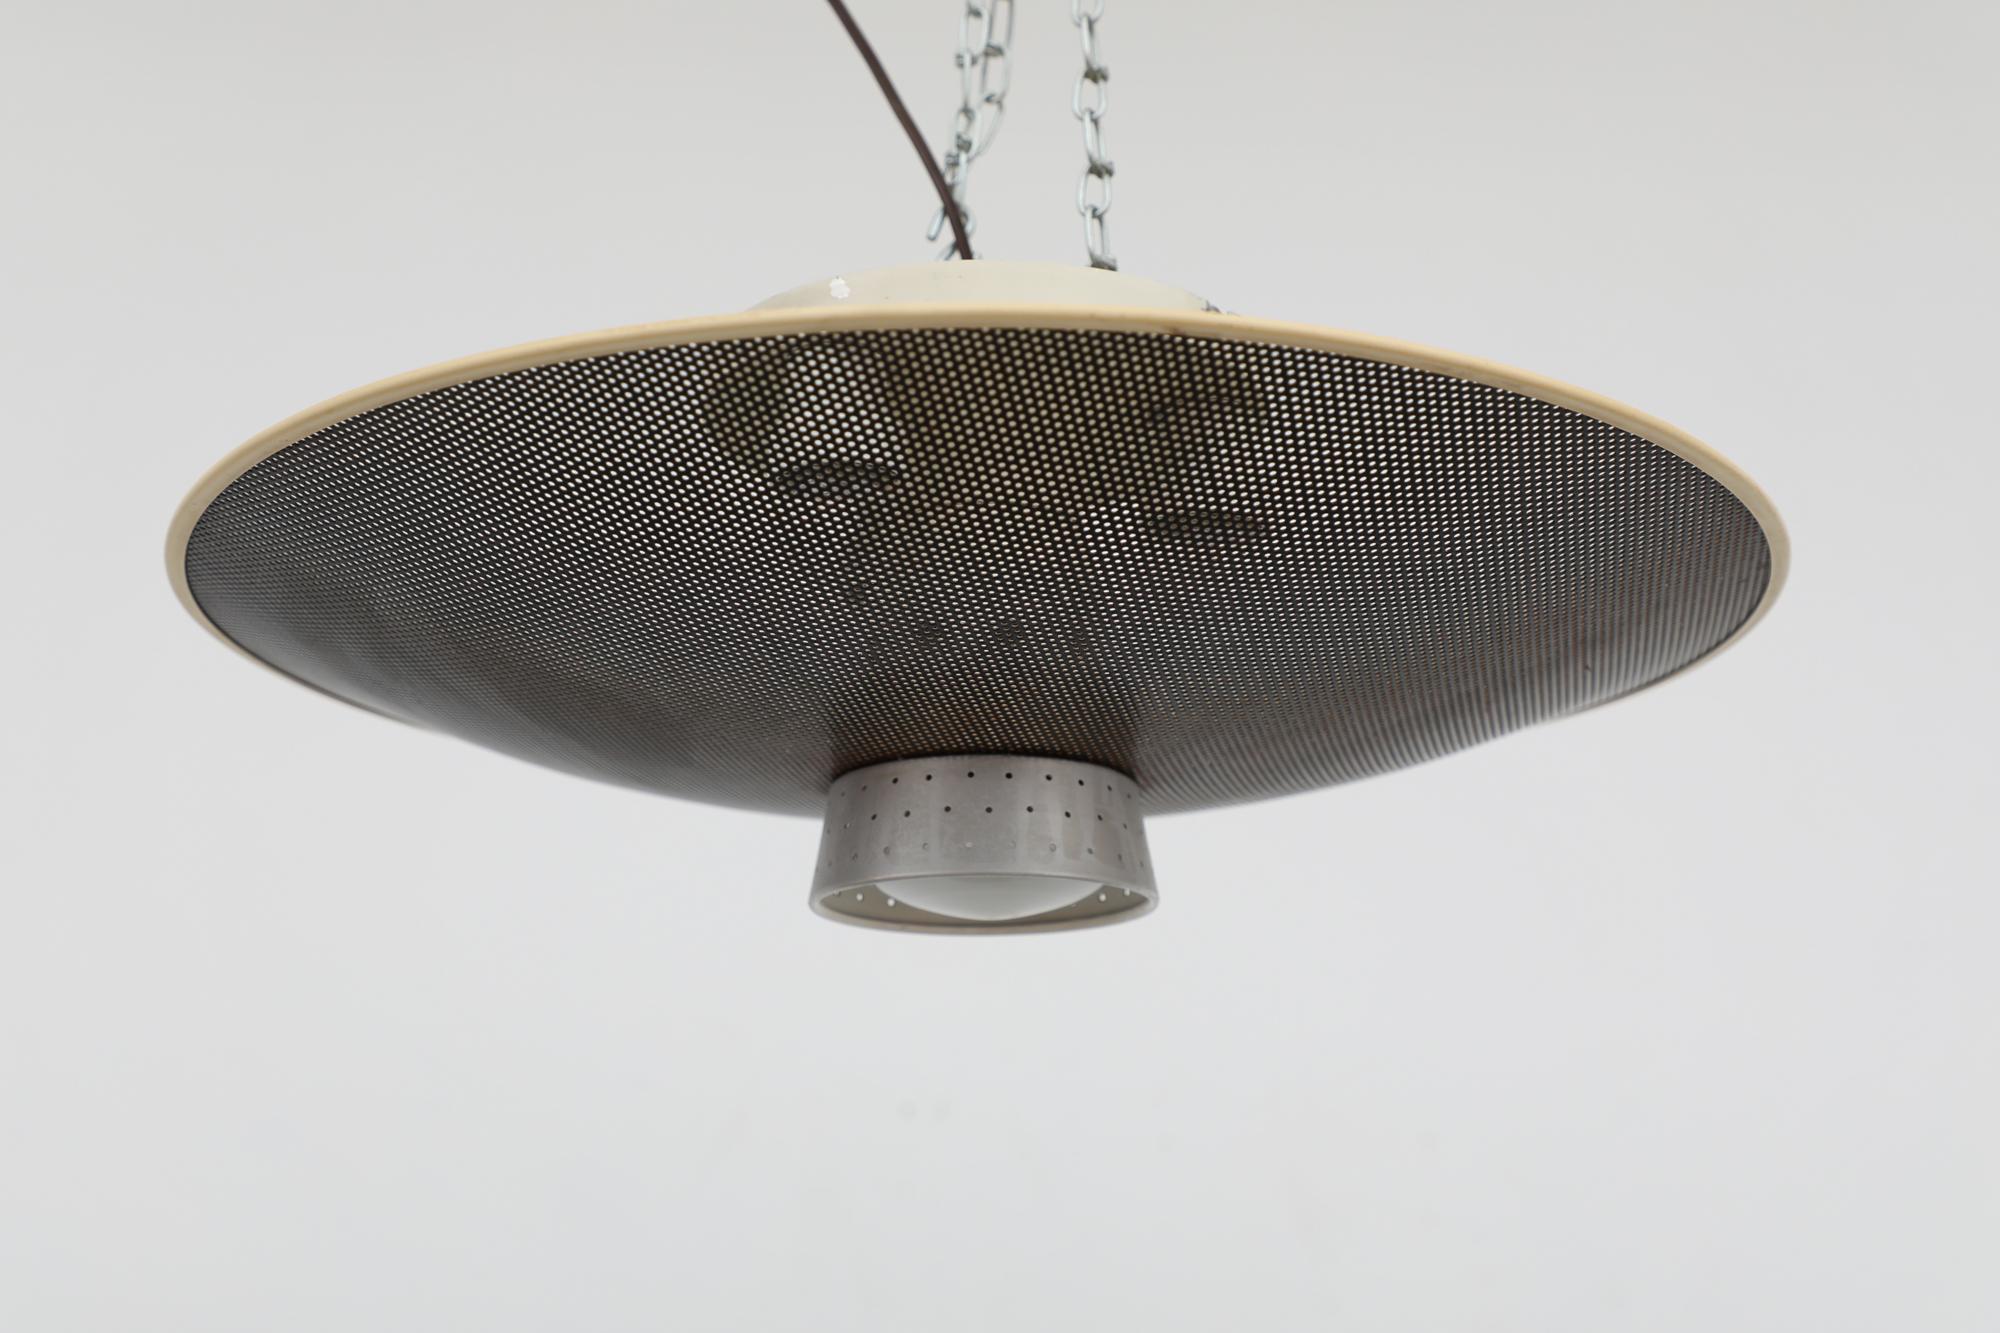 1960s flush mount ceiling lamp designed by Louis Kalff for Philips. The lamp has a perforated dome shade, three upper bulbs and a single downward socket housed in a semi-perforated aluminum shade. In original condition with visible wear, including